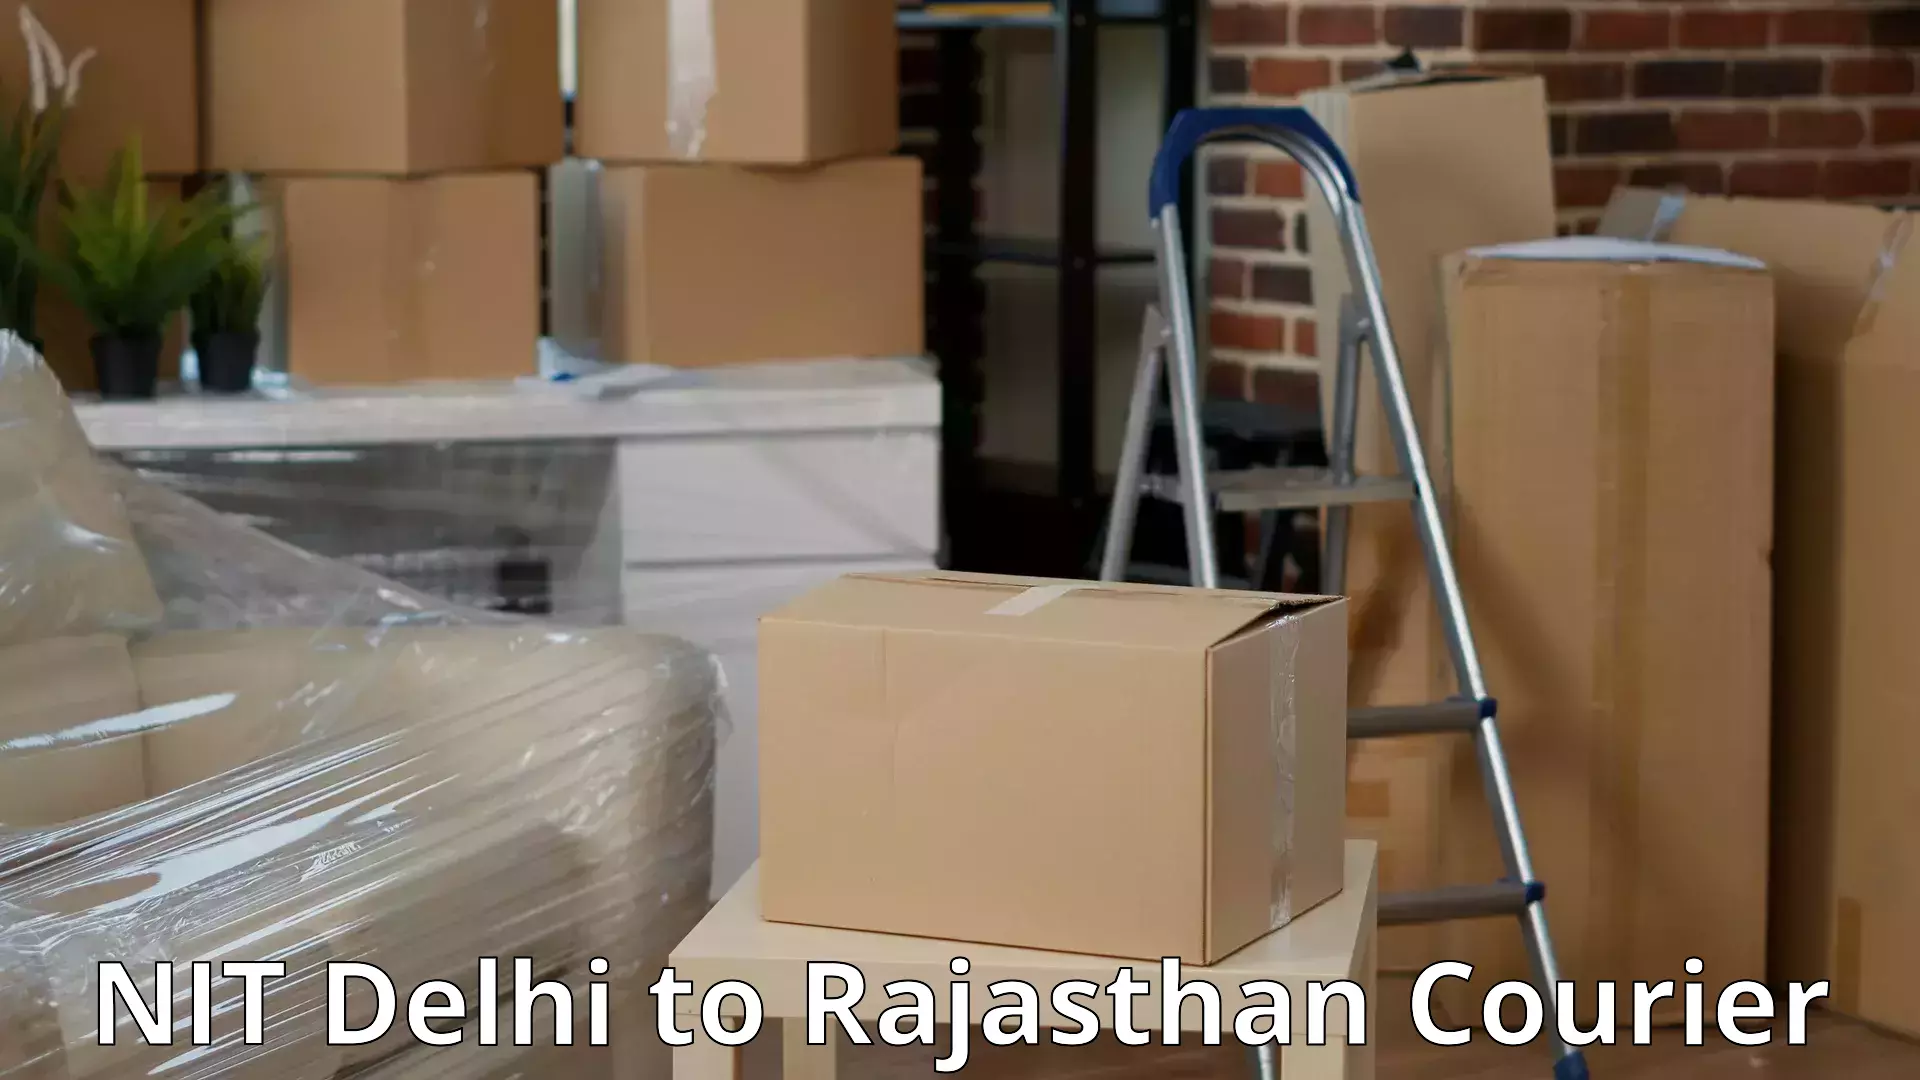 Moving and packing experts NIT Delhi to Ras Pali